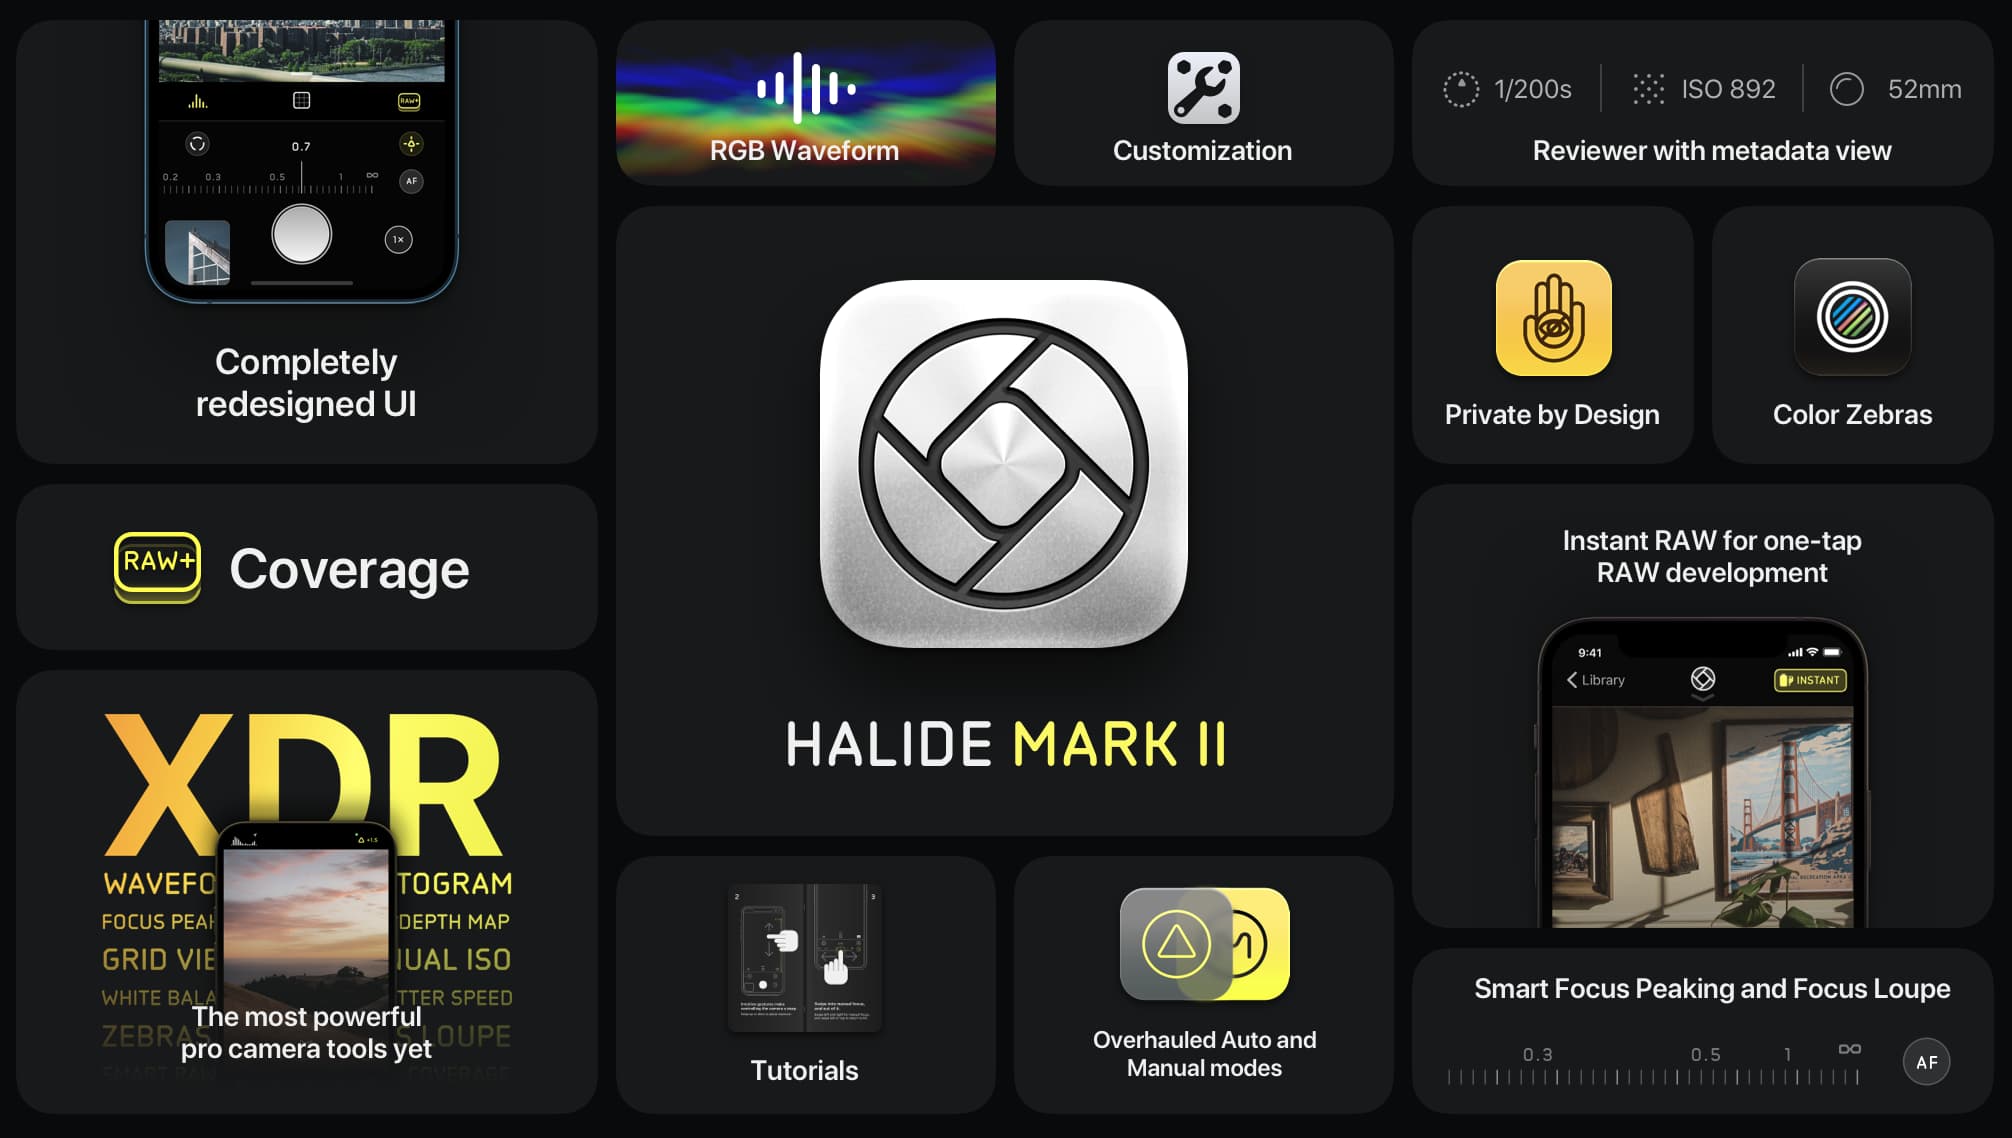 Promotional graphics showcasing all the major features of the iPhone camera app Halide Mark II